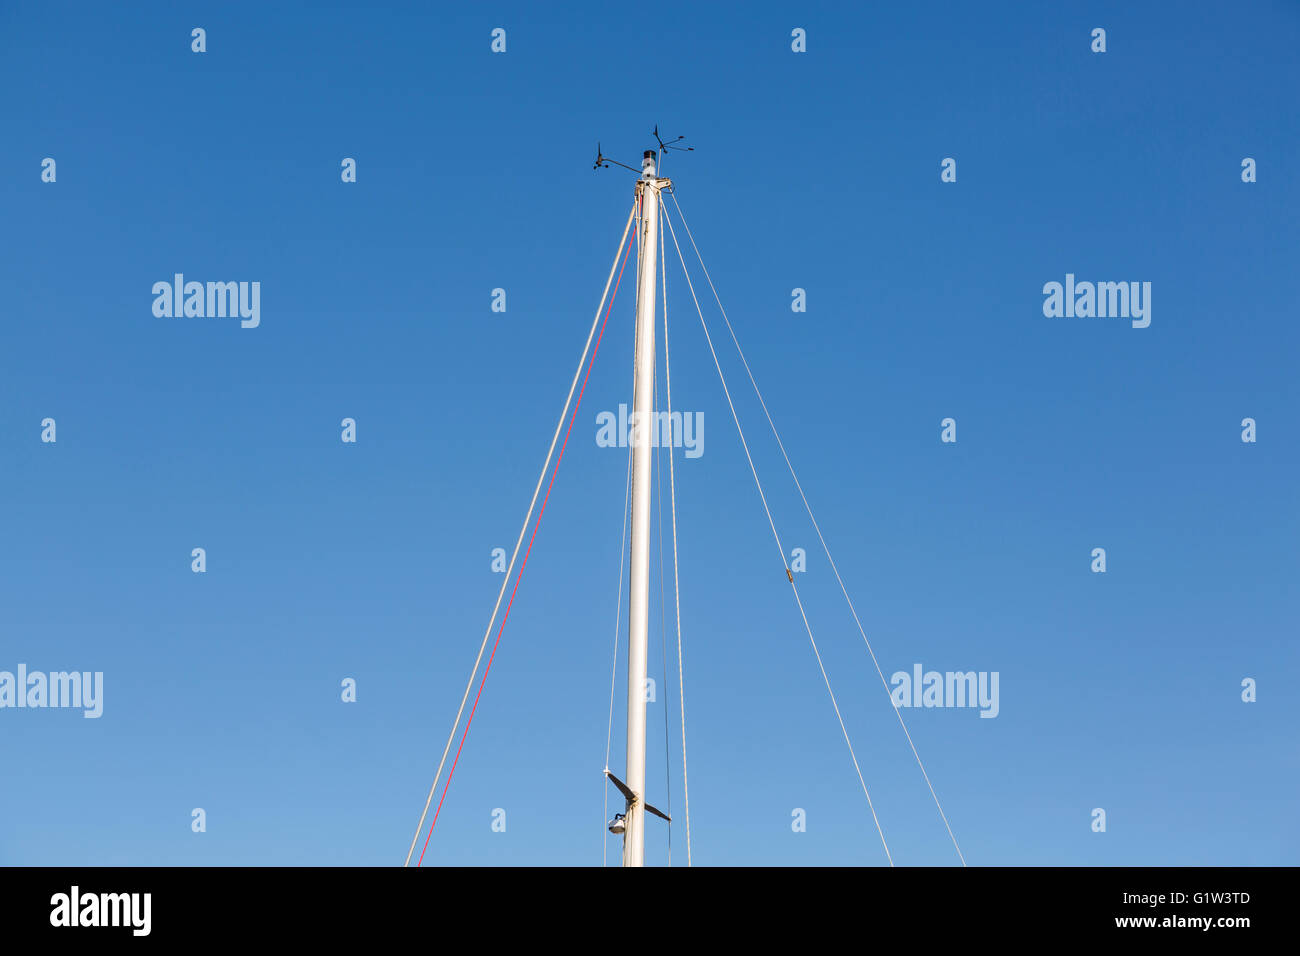 A boat sailing mast against a clear blue sky Stock Photo